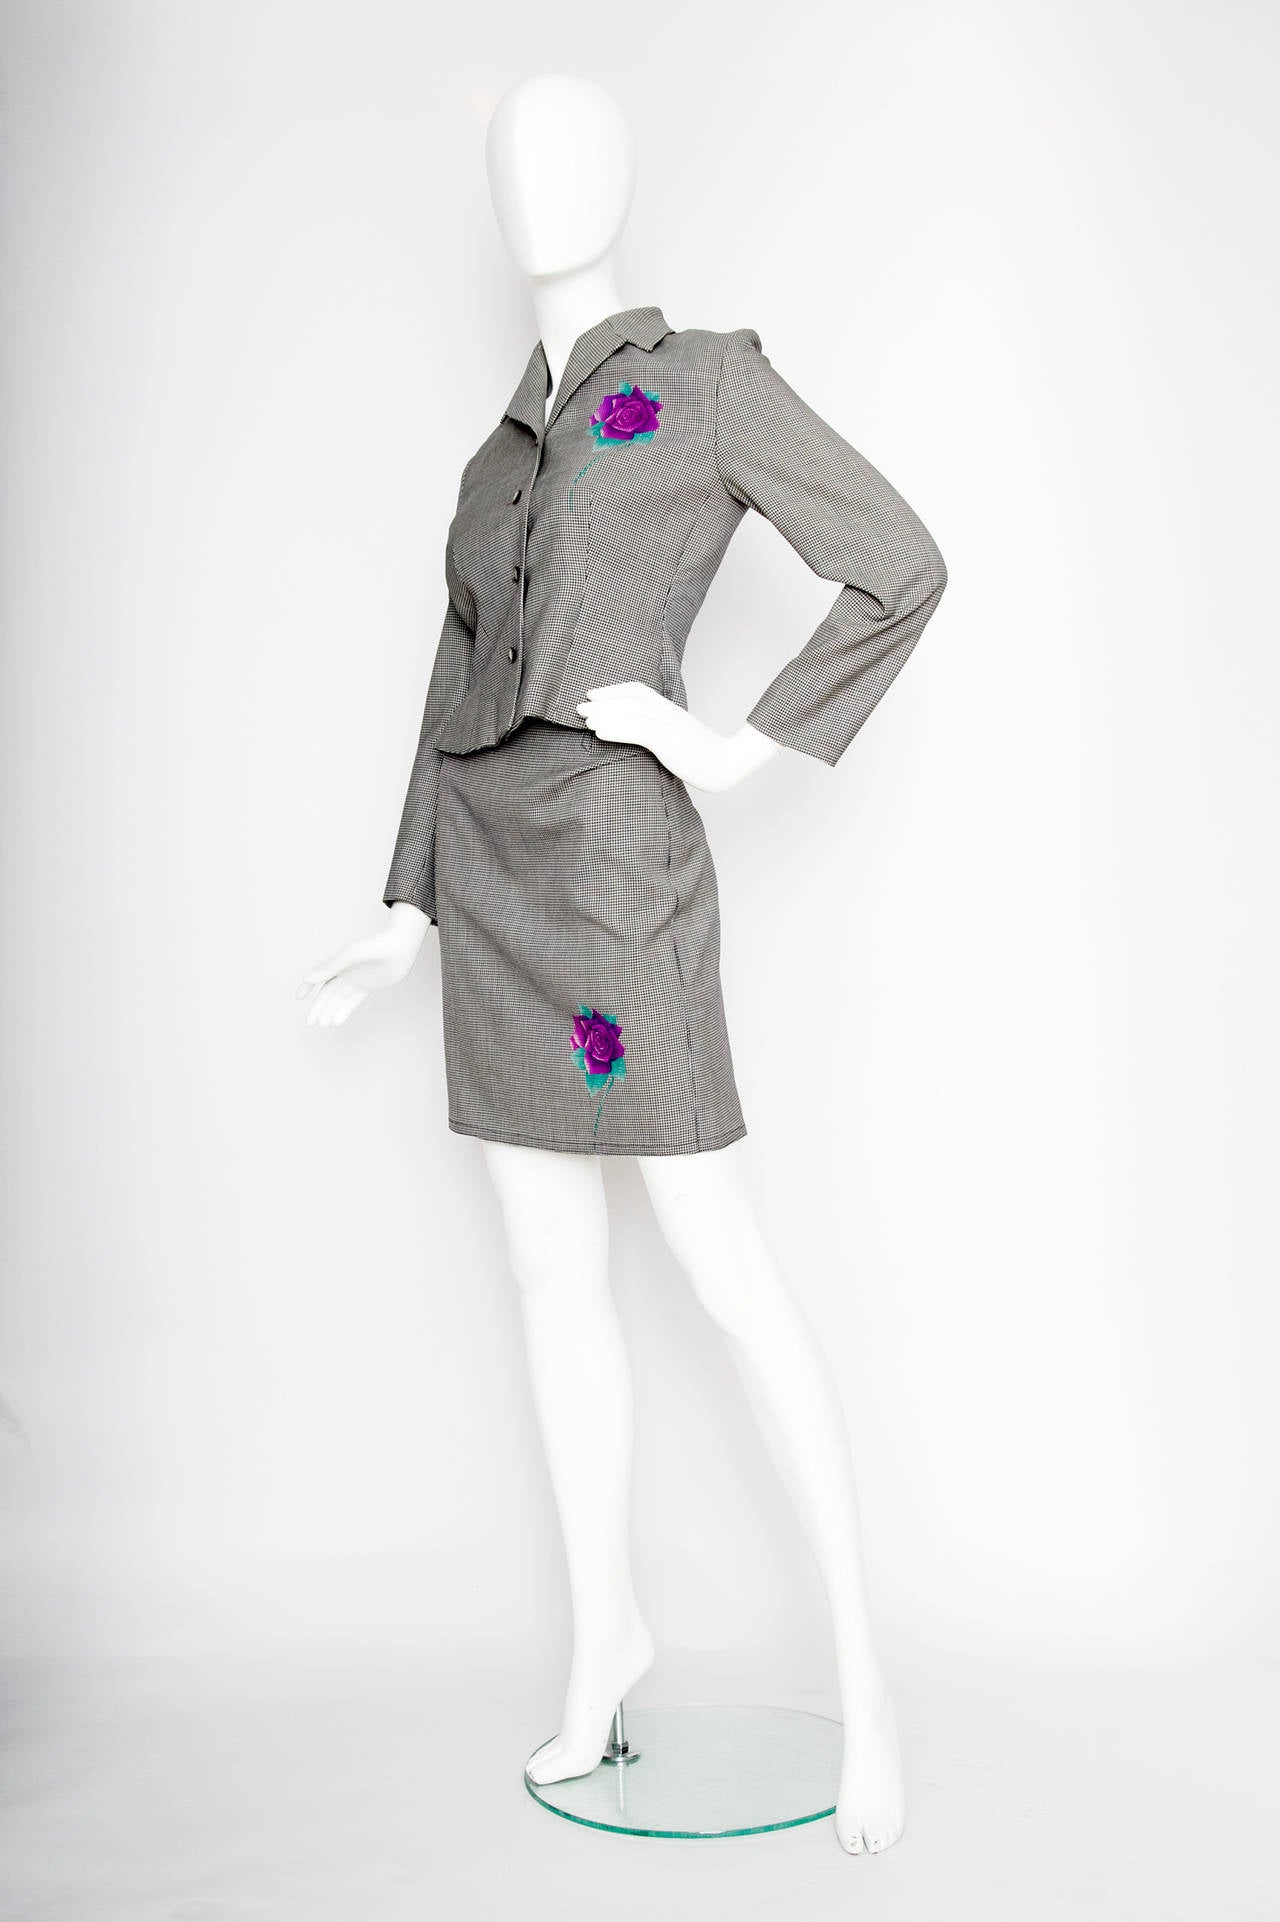 A gorgeous 1980s monochrome Gianni Versace wool skirt suit with multiple bright purple and green rose prints. The roses are placed symmetrically on both jacket and skirt and add to the graphic nature of the suit. The jacket has a full front button